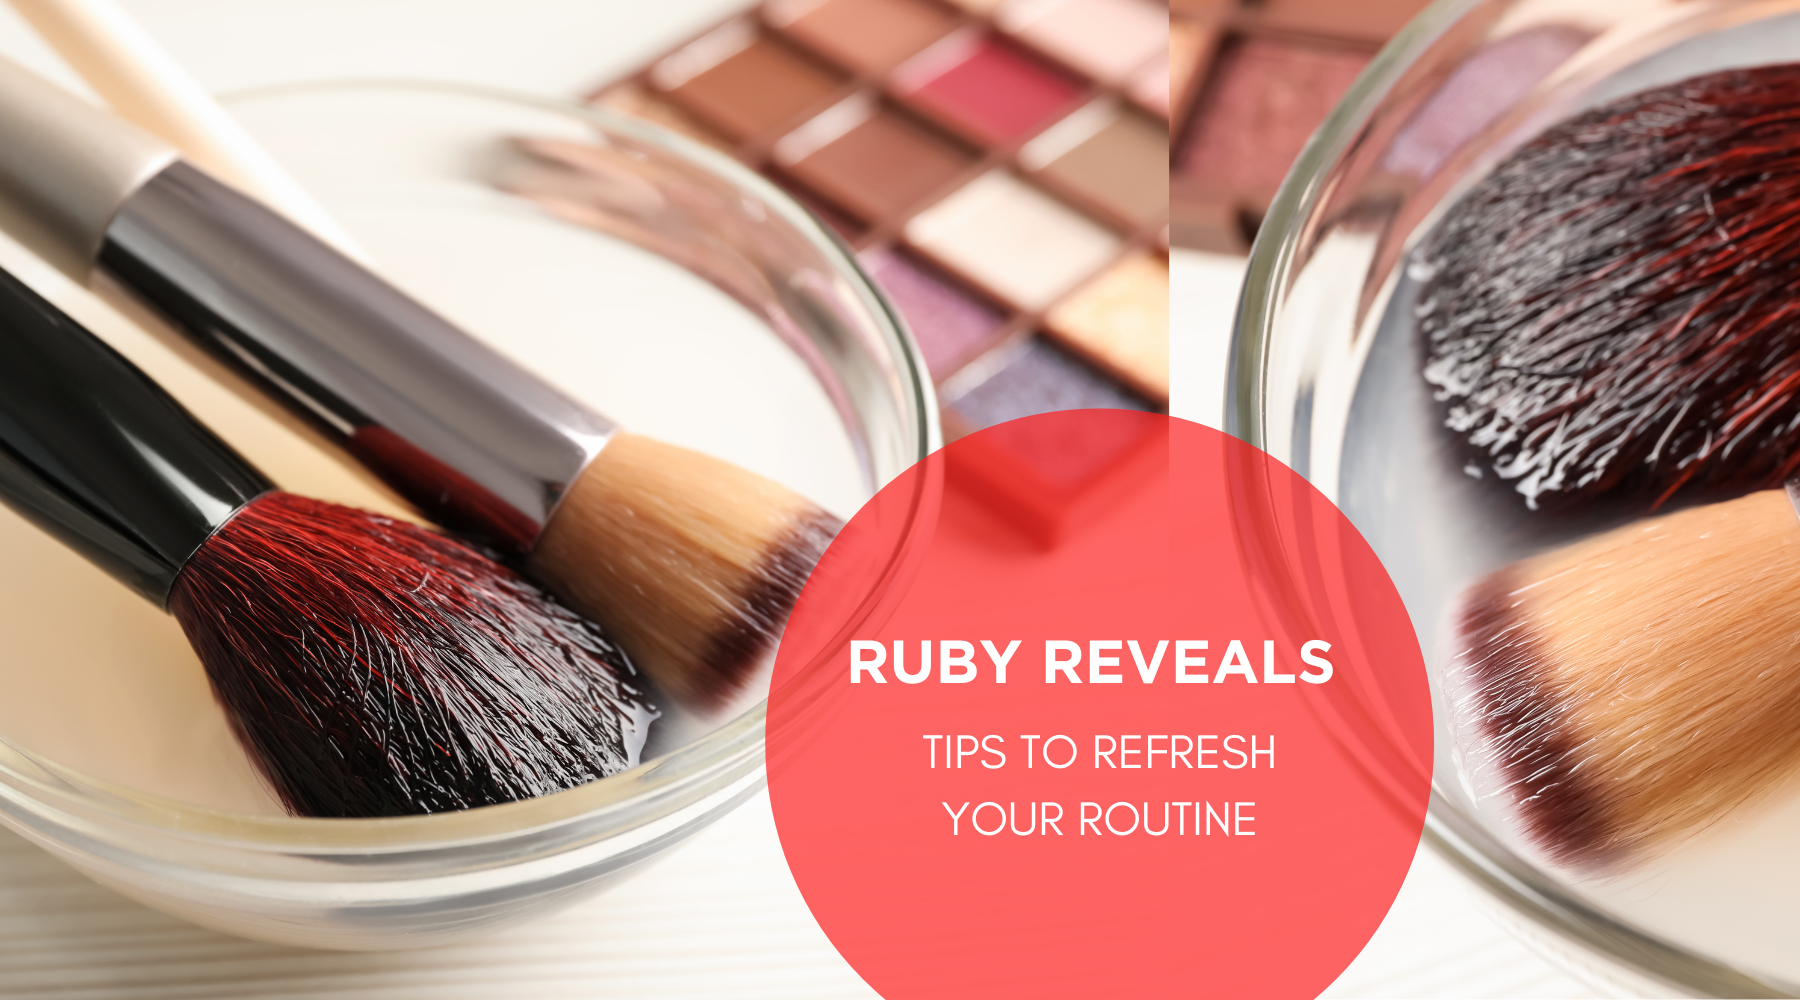 RUBY REVEALS: TIPS TO REFRESH YOUR ROUTINE